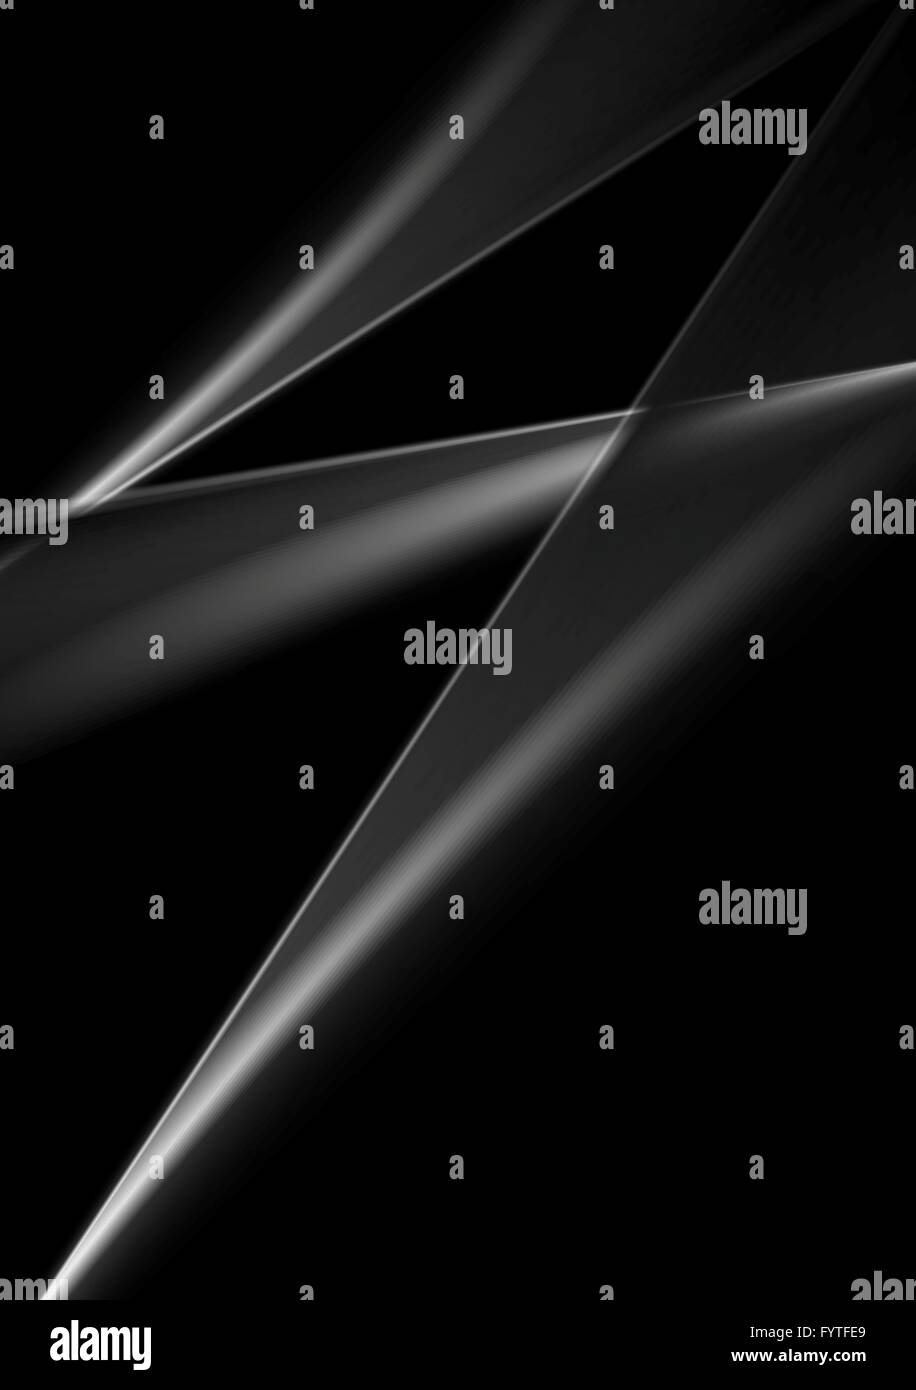 Dark abstract monochrome smooth lines background Stock Photo